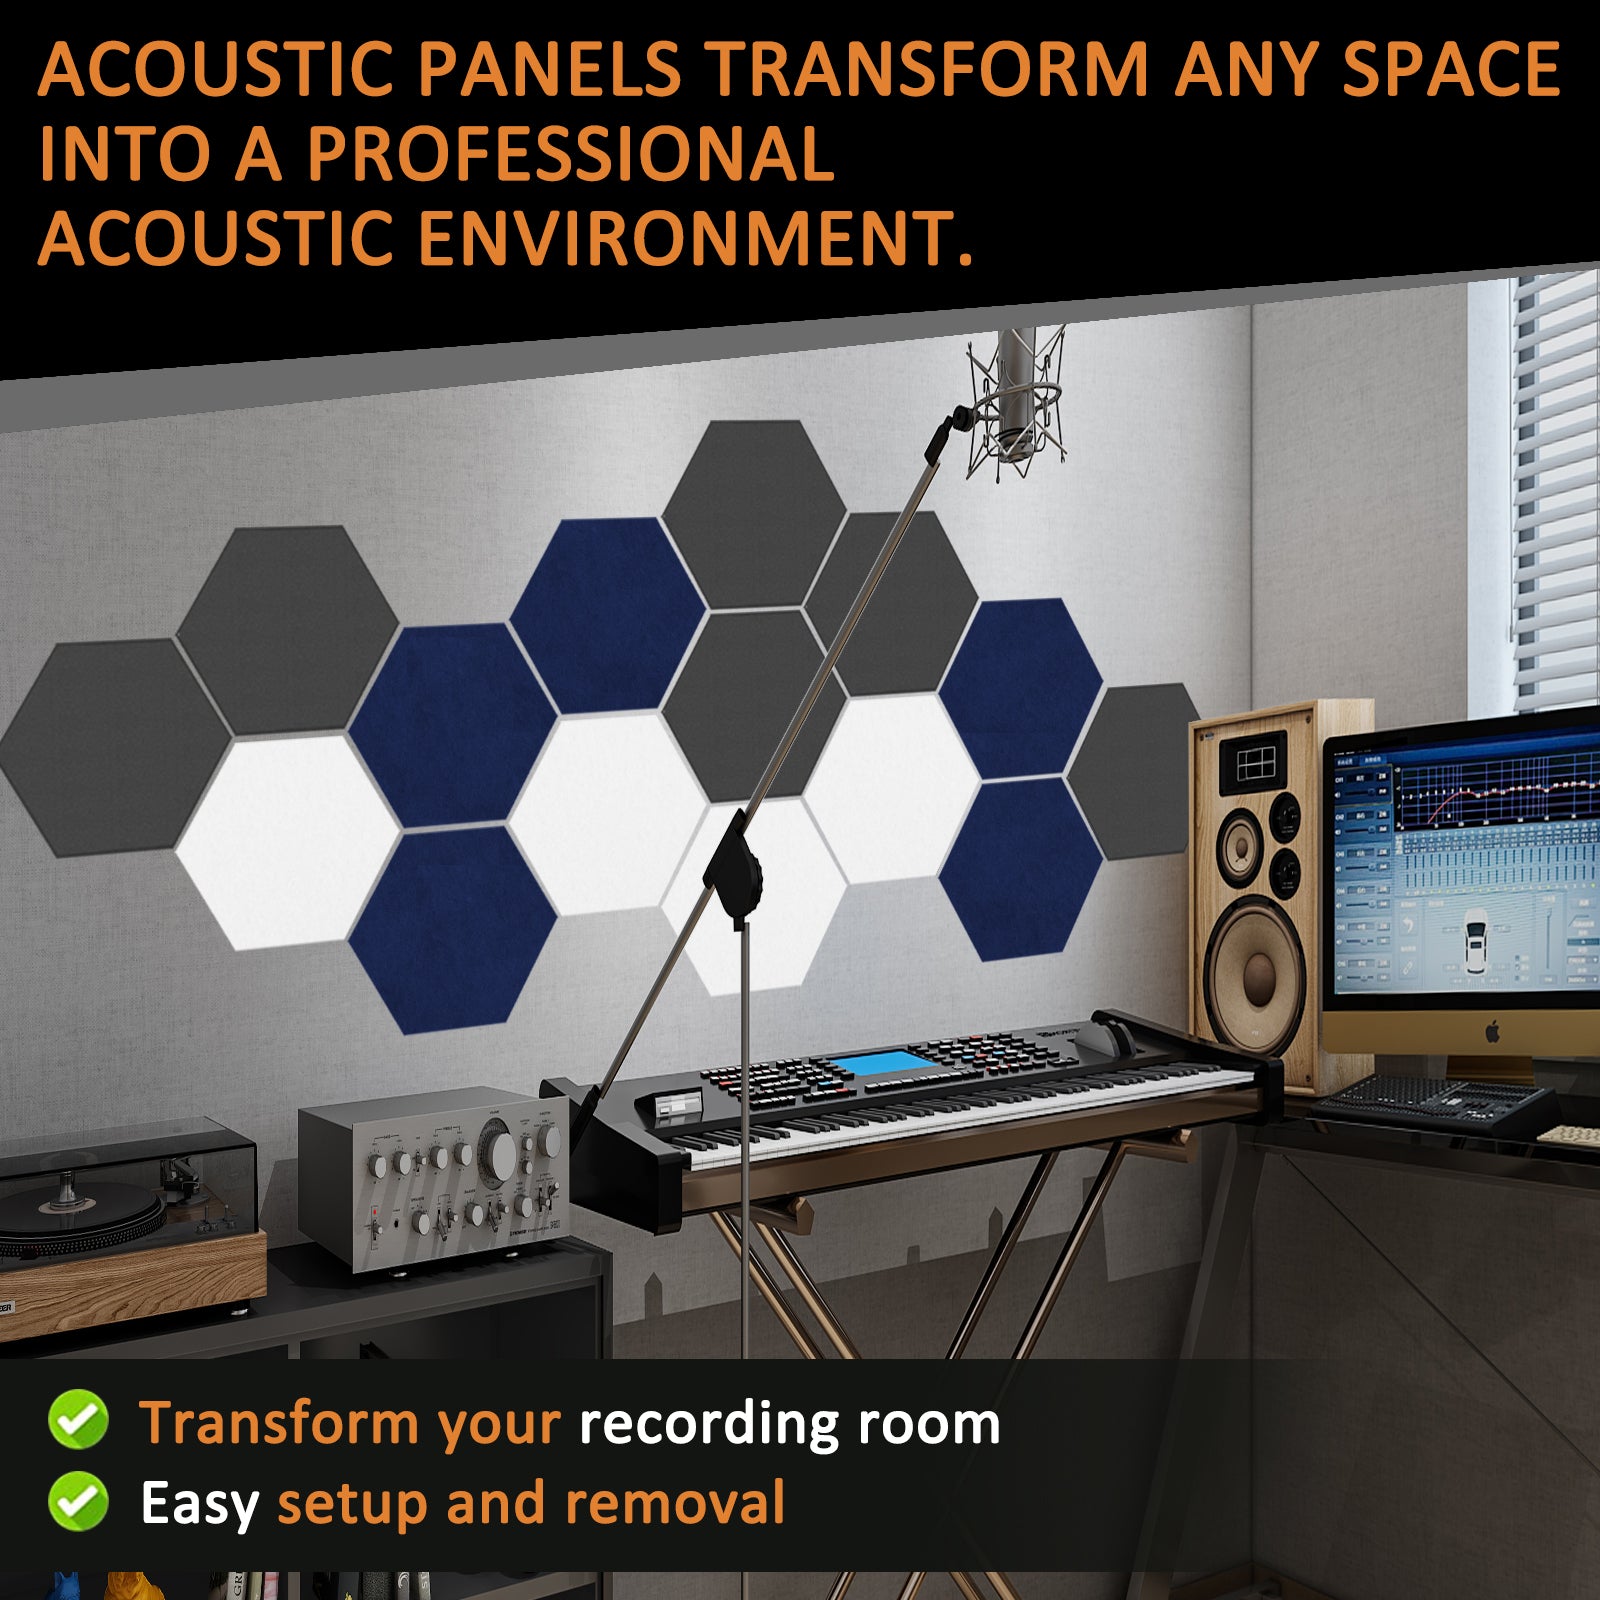 Benefits Of Home Music Studio Soundproofing And Acoustics